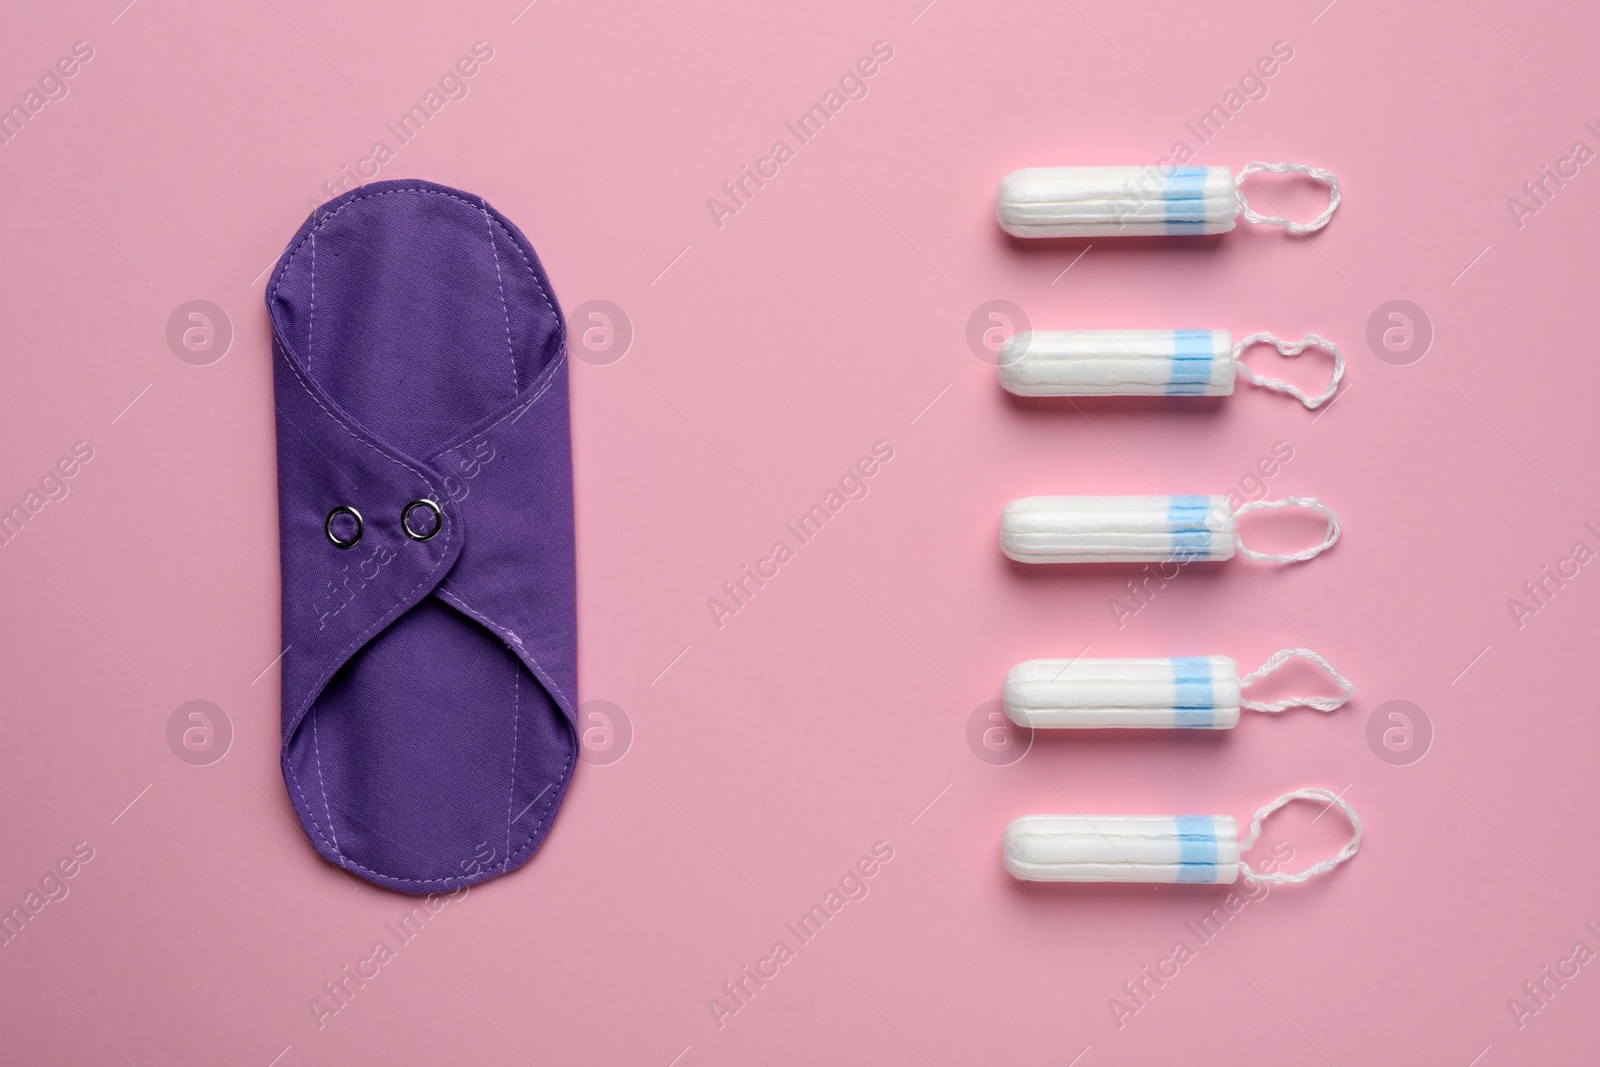 Photo of Reusable cloth menstrual pad and tampons on pink background, flat lay